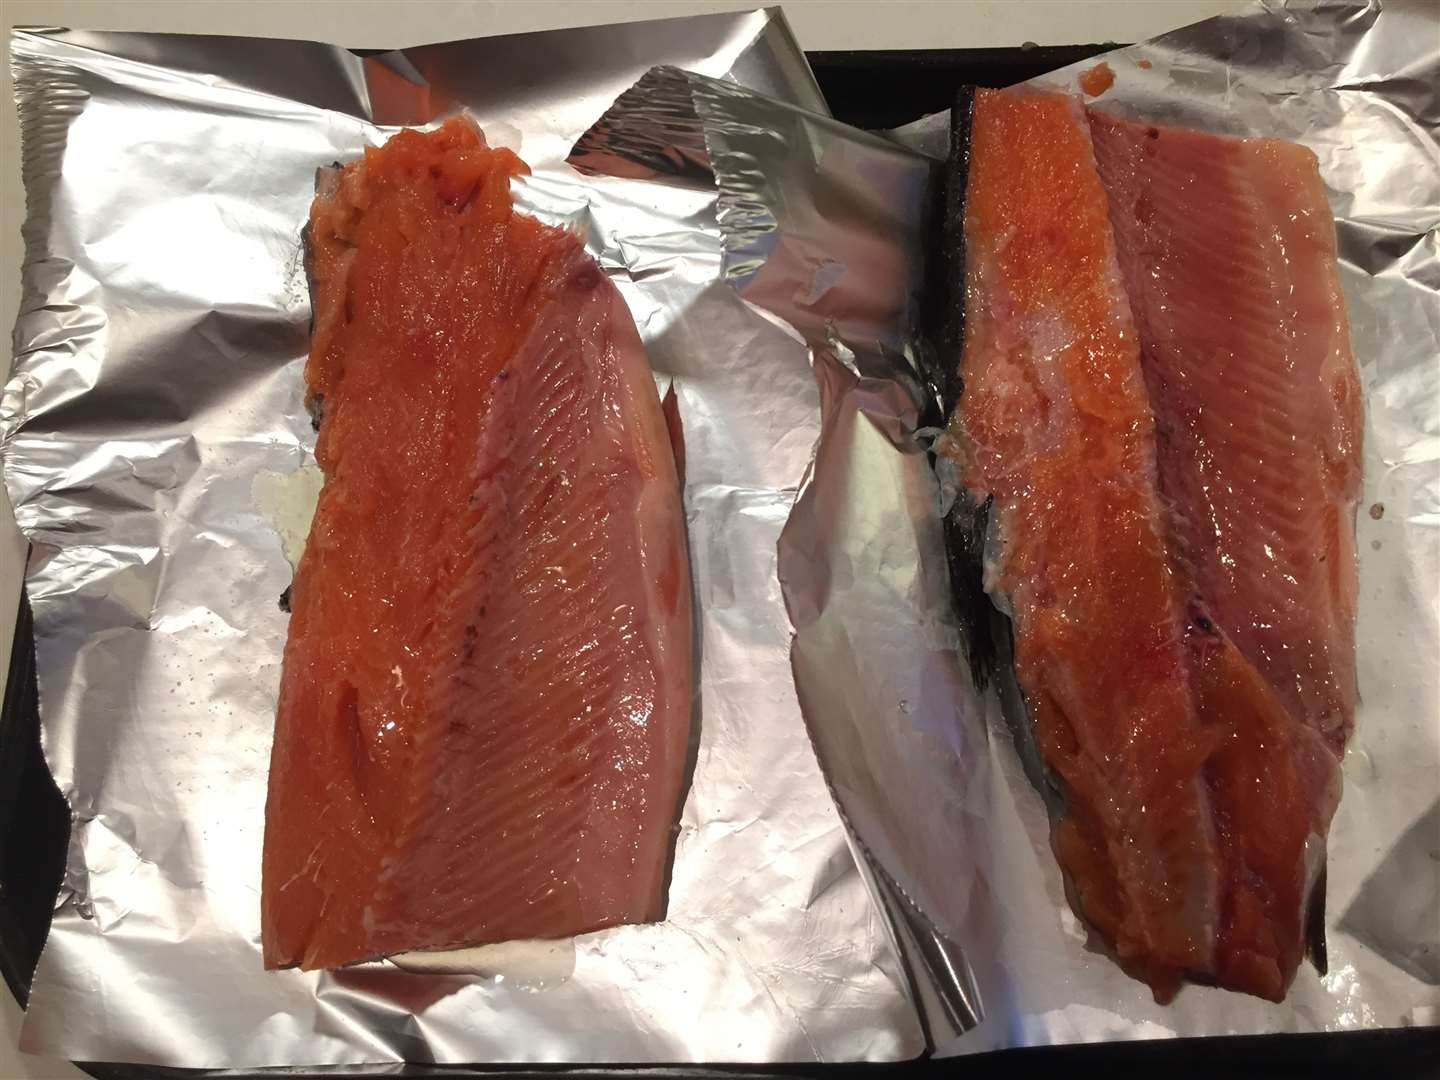 I wrapped the trout in foil to keep at the juices in and cooked for just 20 minutes